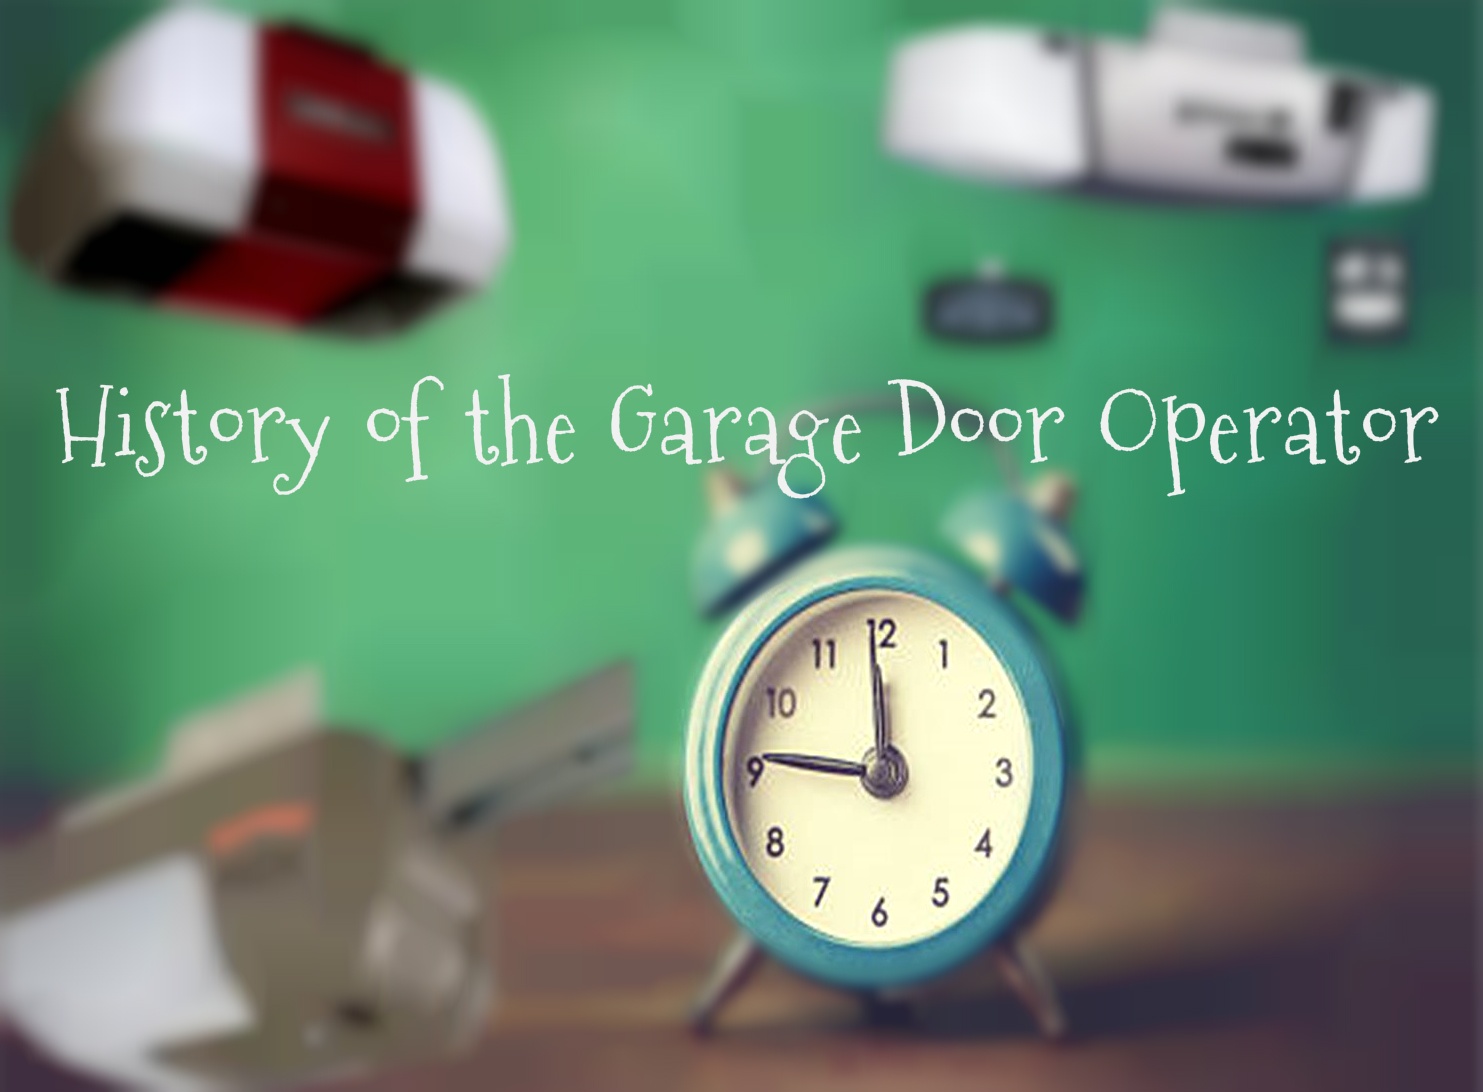 Residential Automatic Garage Door Openers – a Brief History